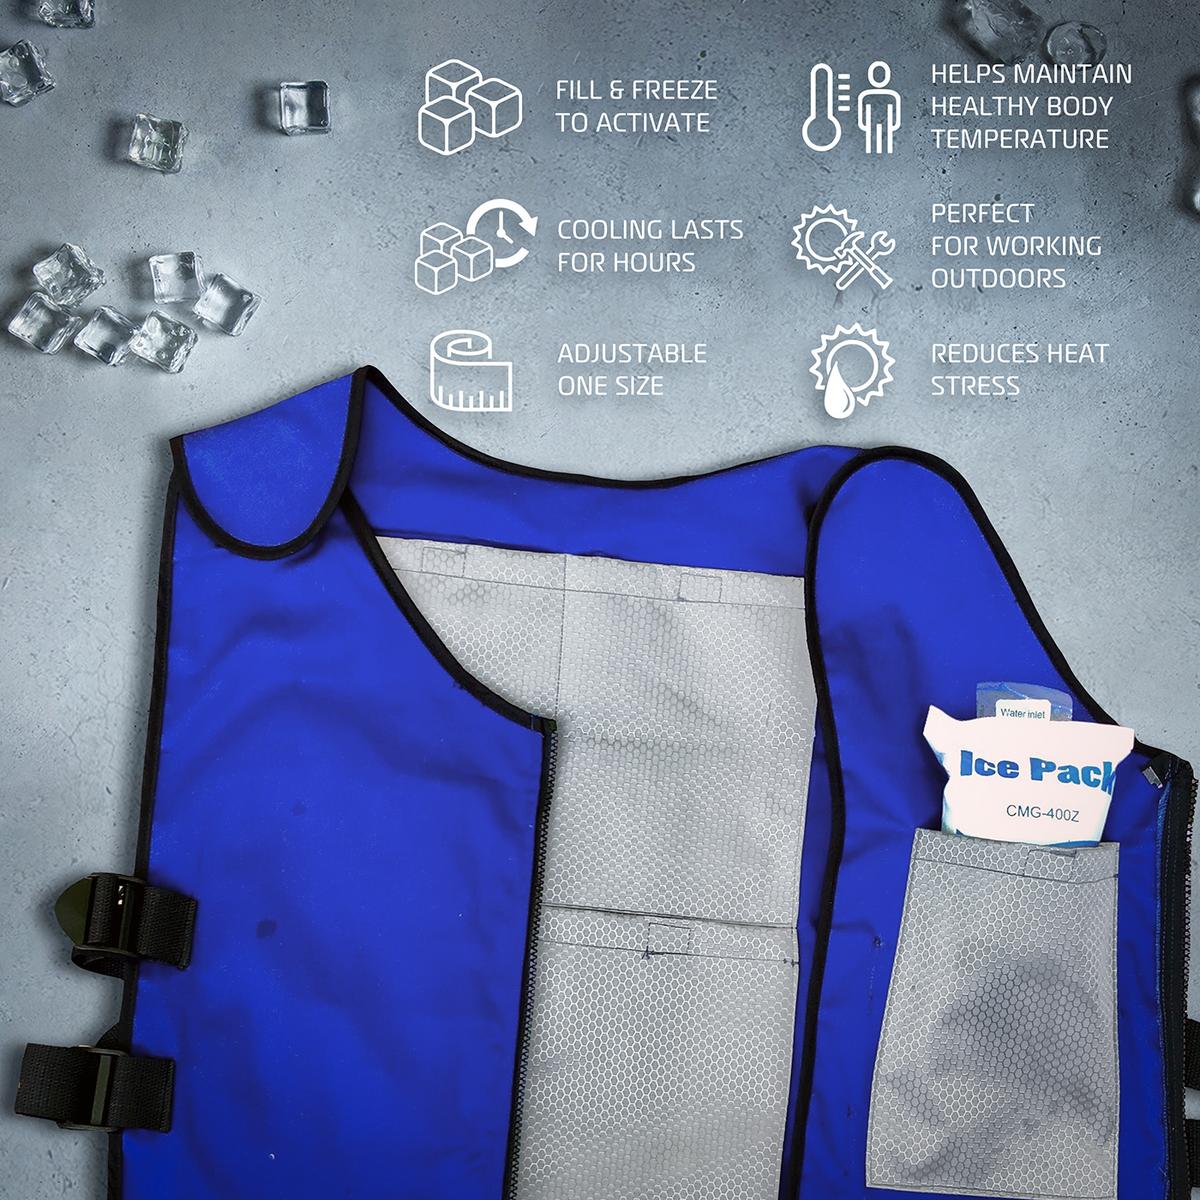 AlphaCool Arctic Cooling Ice Vest with Self-Fill Reusable Ice Packs